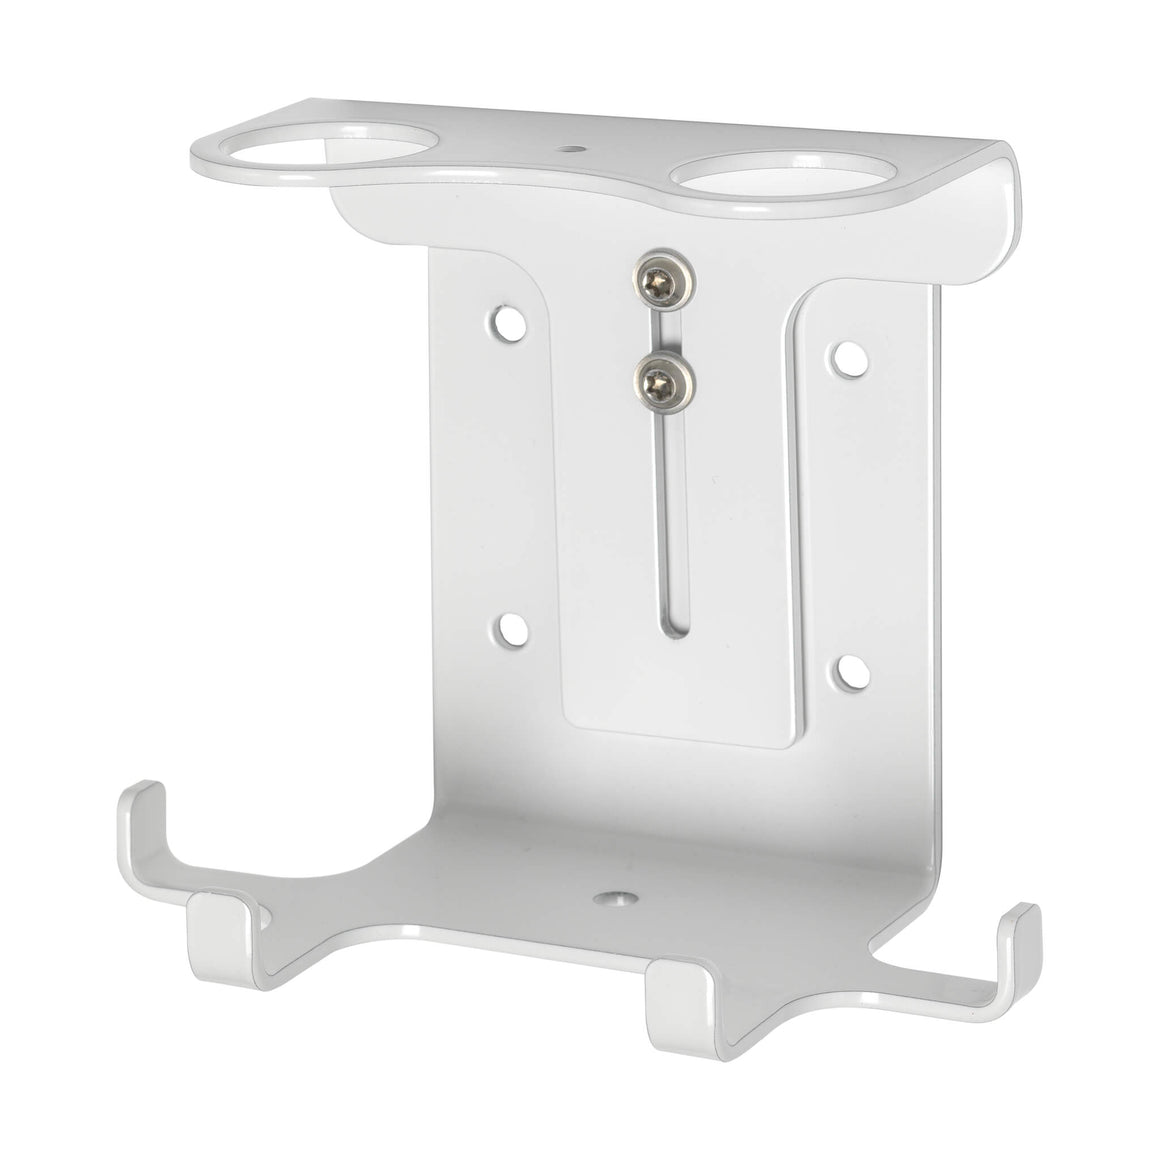 Double 300ml Security Wall-Mounted Holder - Satin White